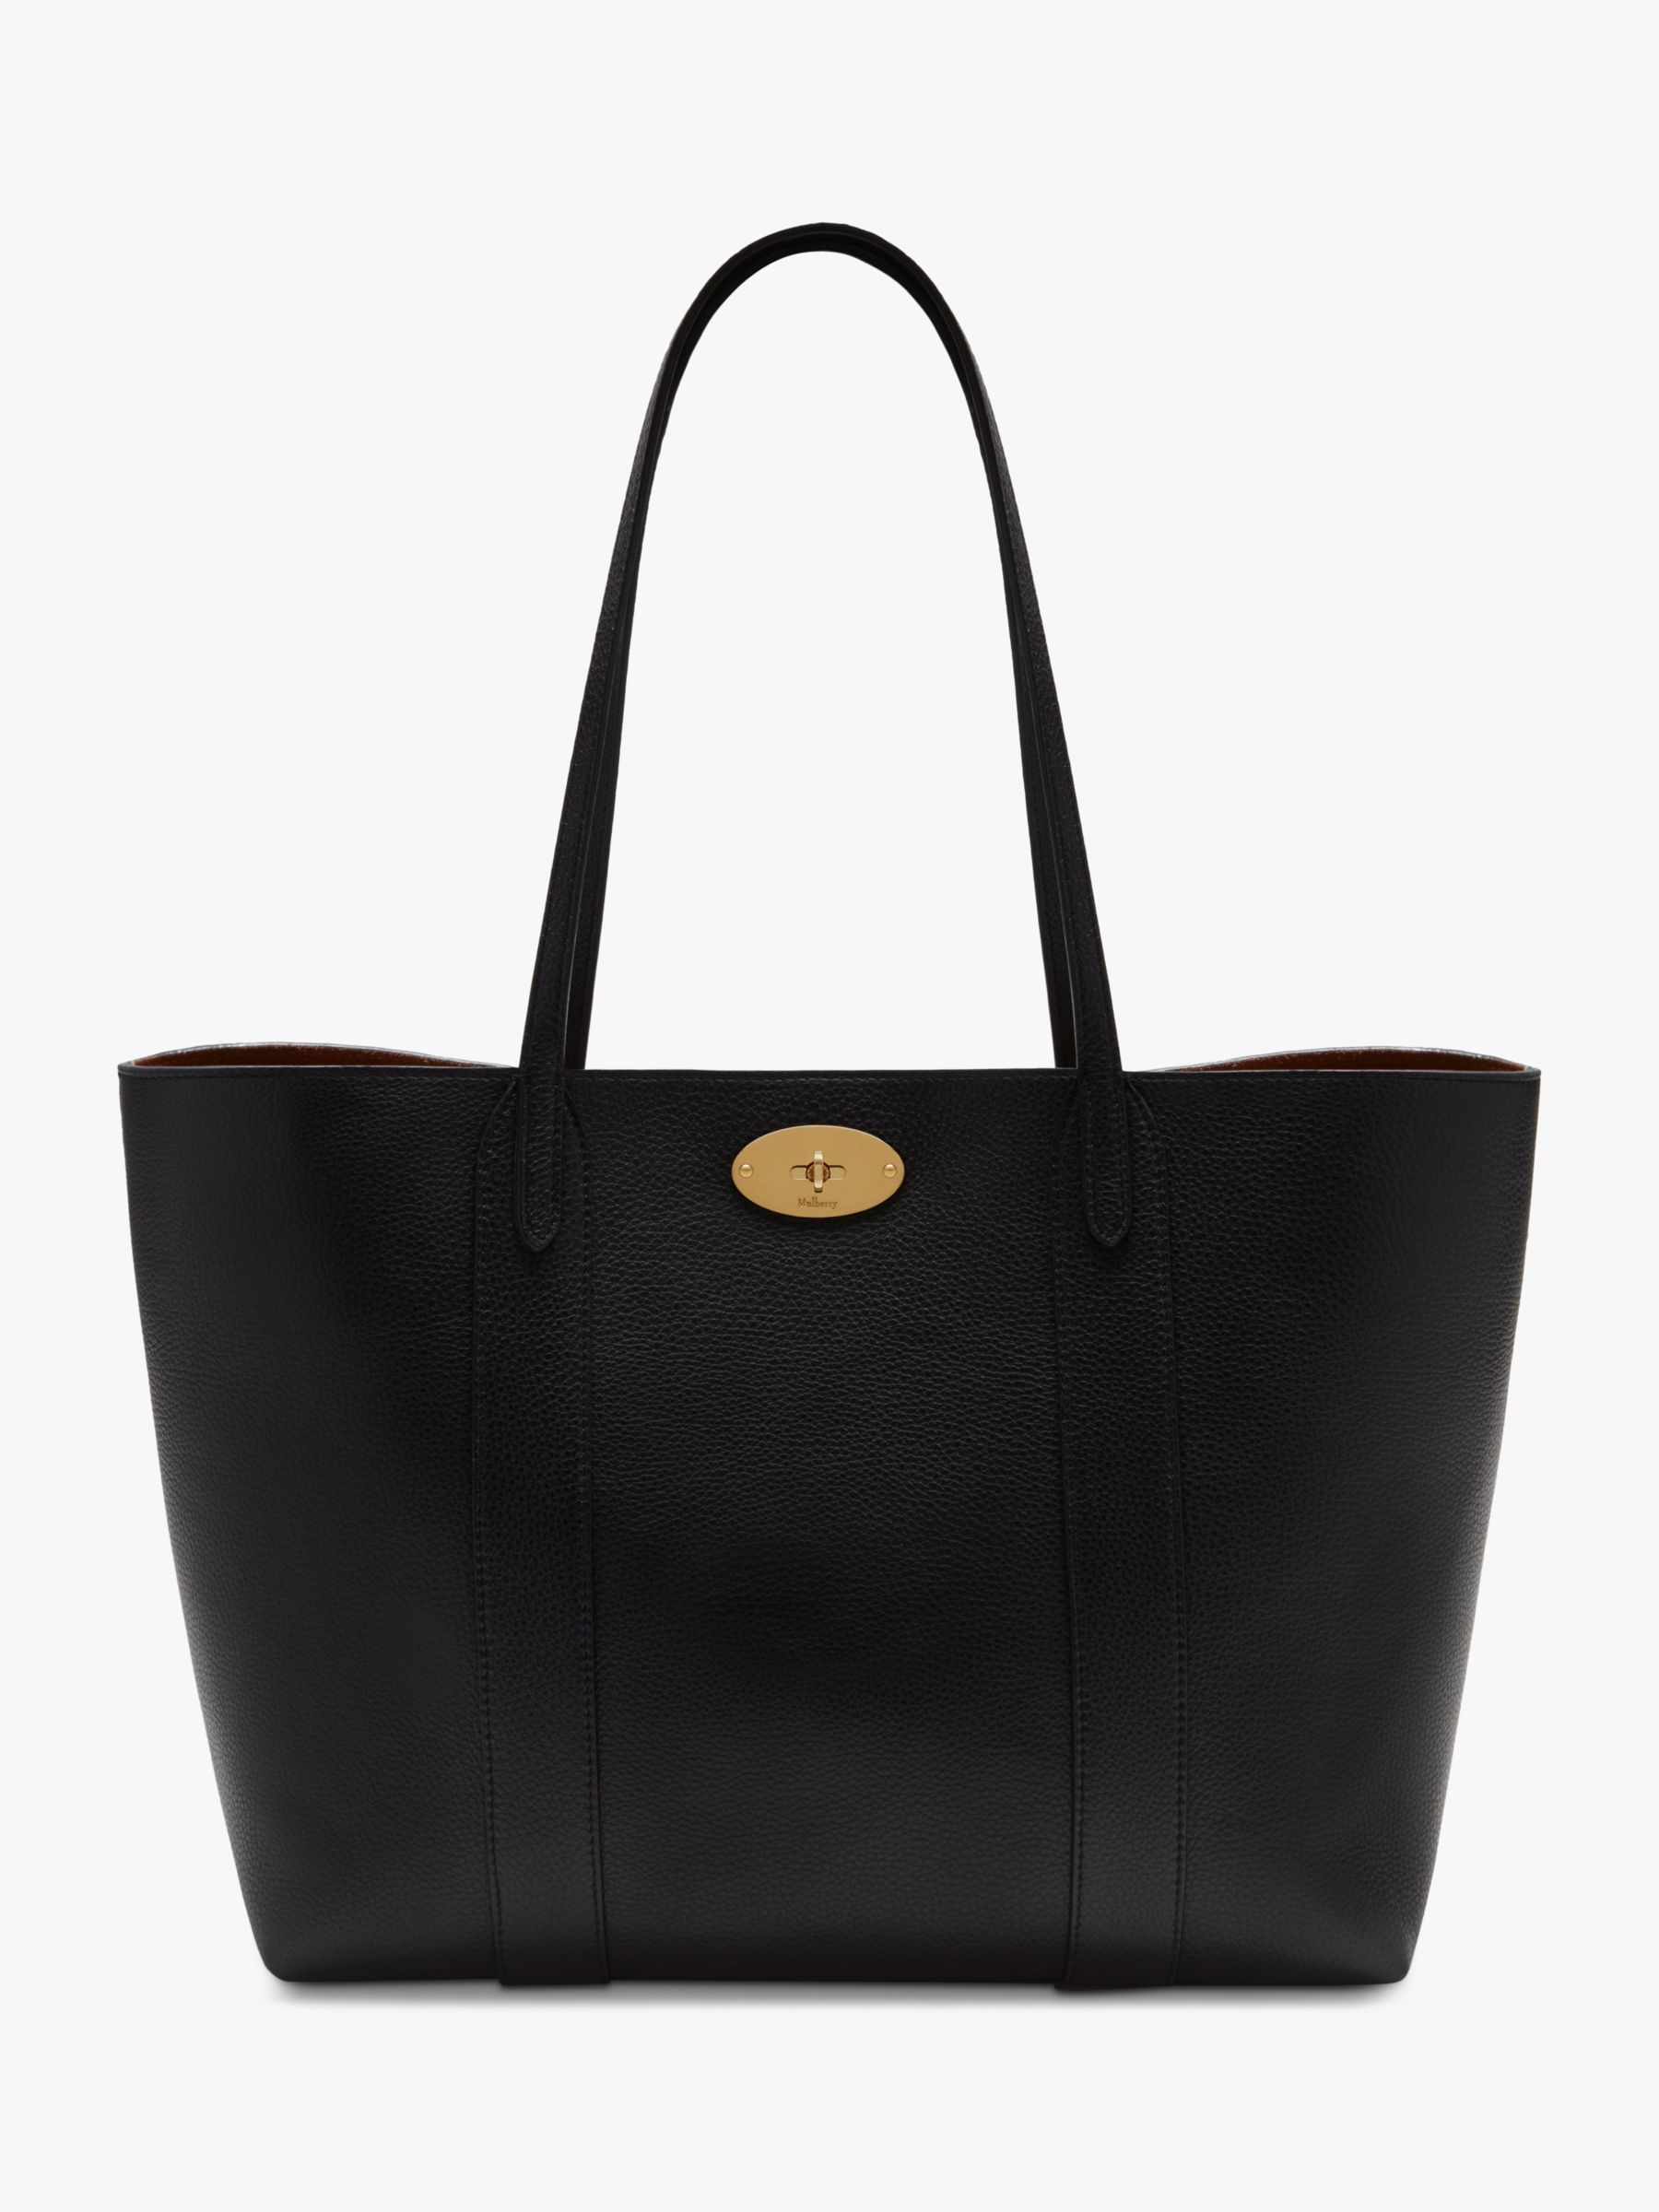 Mulberry Bayswater Small Classic Grain Leather Tote Bag, Black at John Lewis & Partners